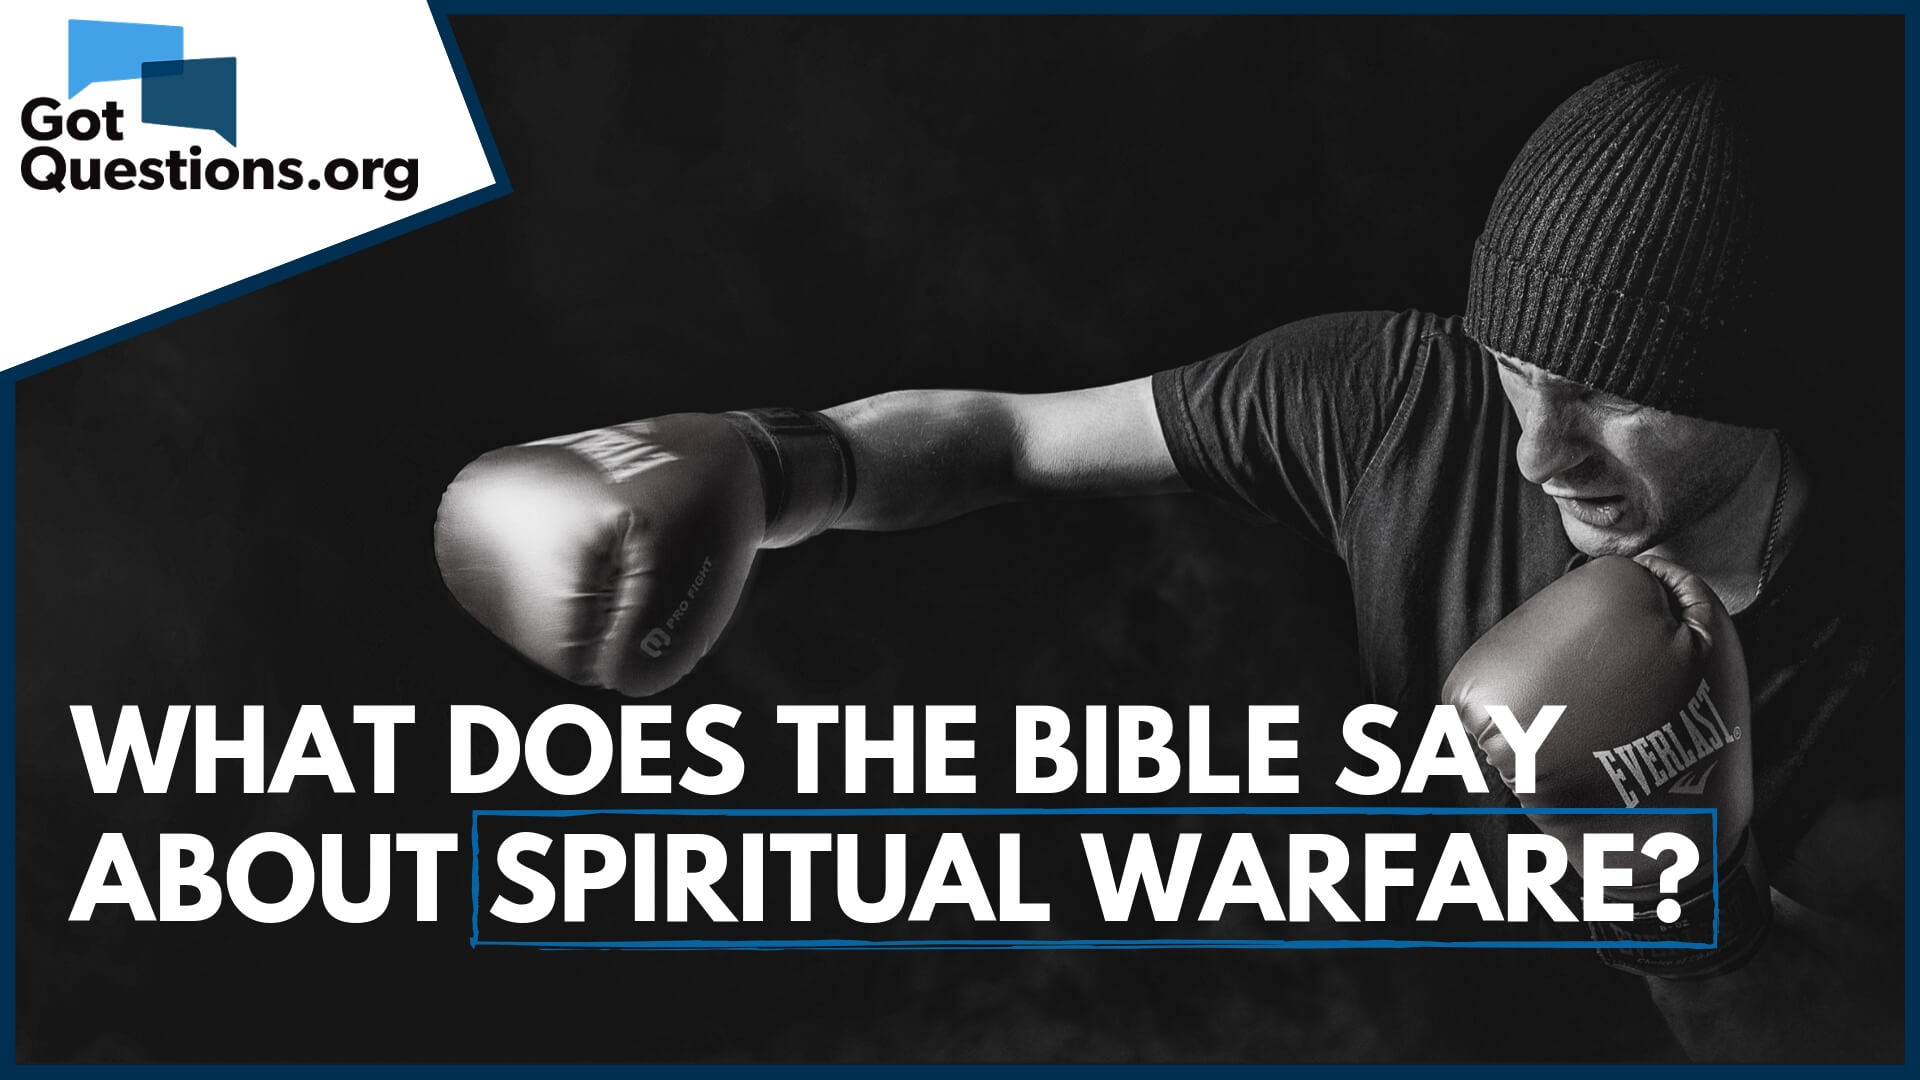 What does the Bible say about extreme fighting?